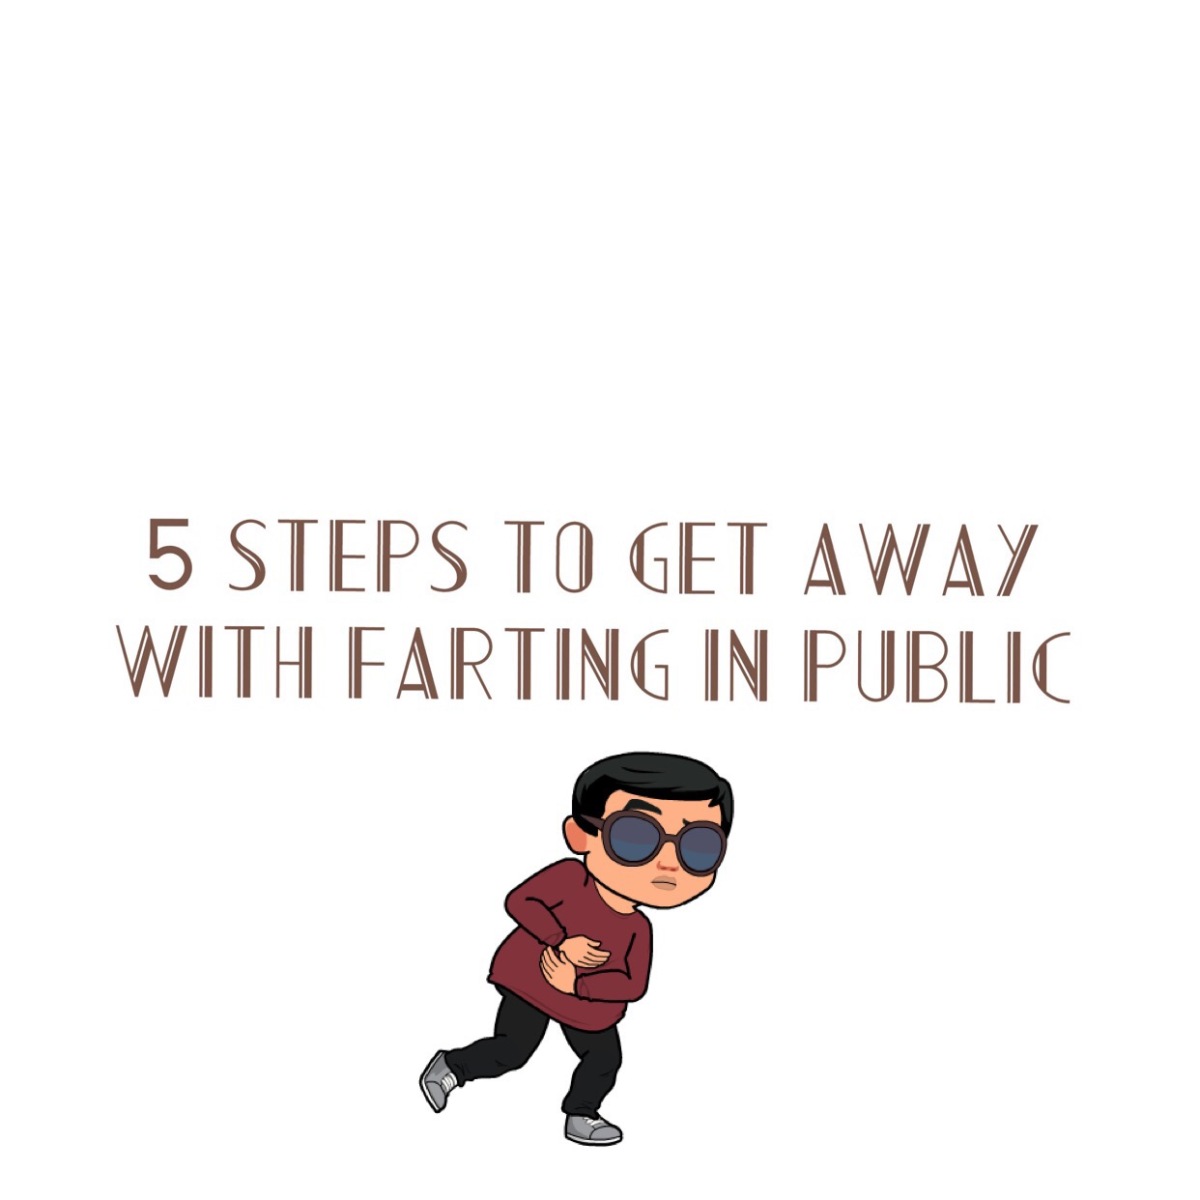 KAILUMS 5 STEPS TO GET AWAY WITH FARTING IN PUBLIC